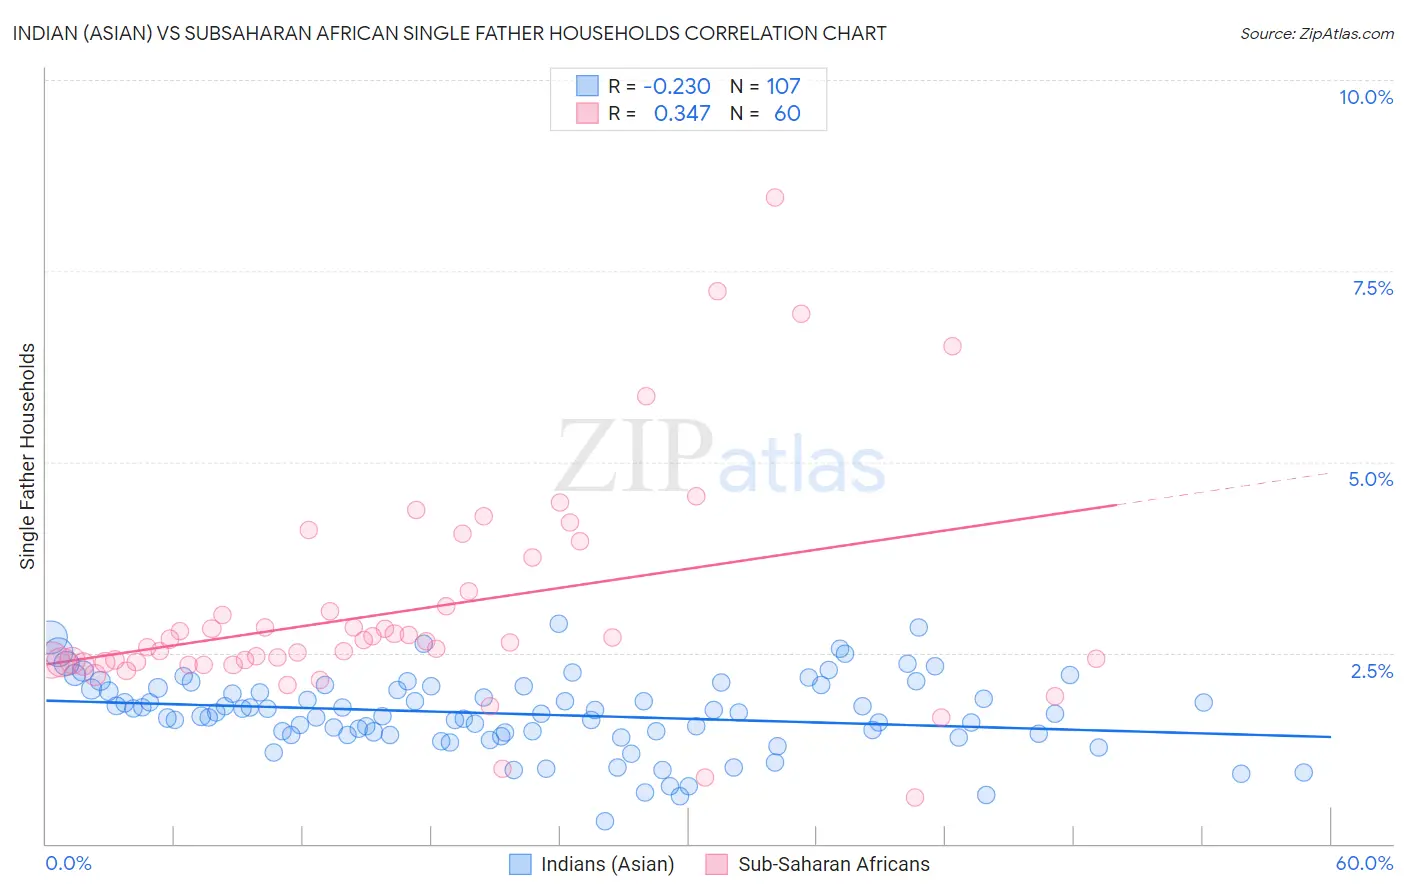 Indian (Asian) vs Subsaharan African Single Father Households